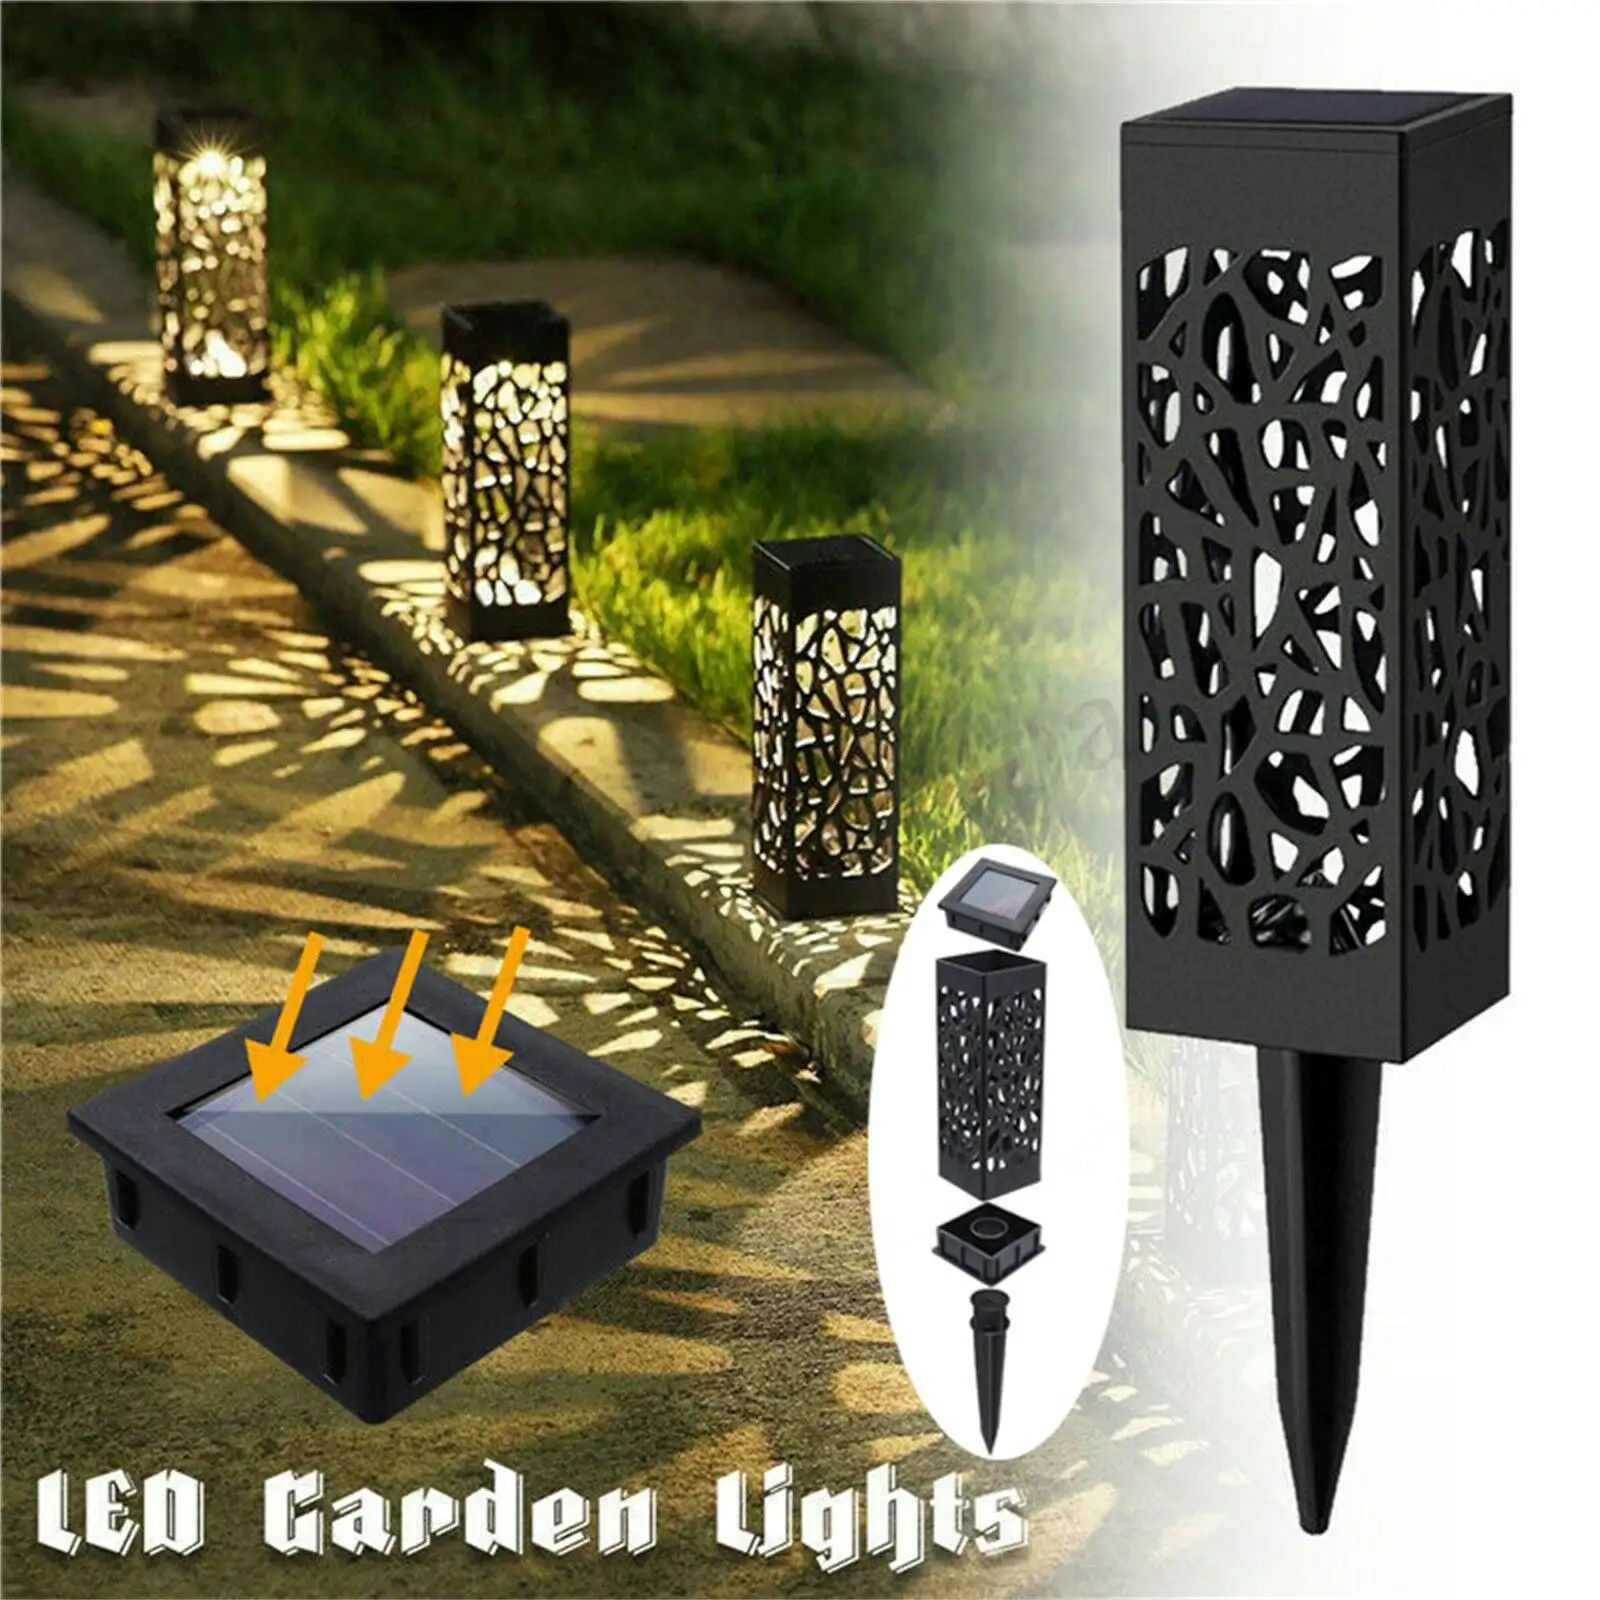 Waterproof Outdoor Landscape LED Solar Lawn Light Pathway Garden Lamp Decor Hollow Out Modern Style